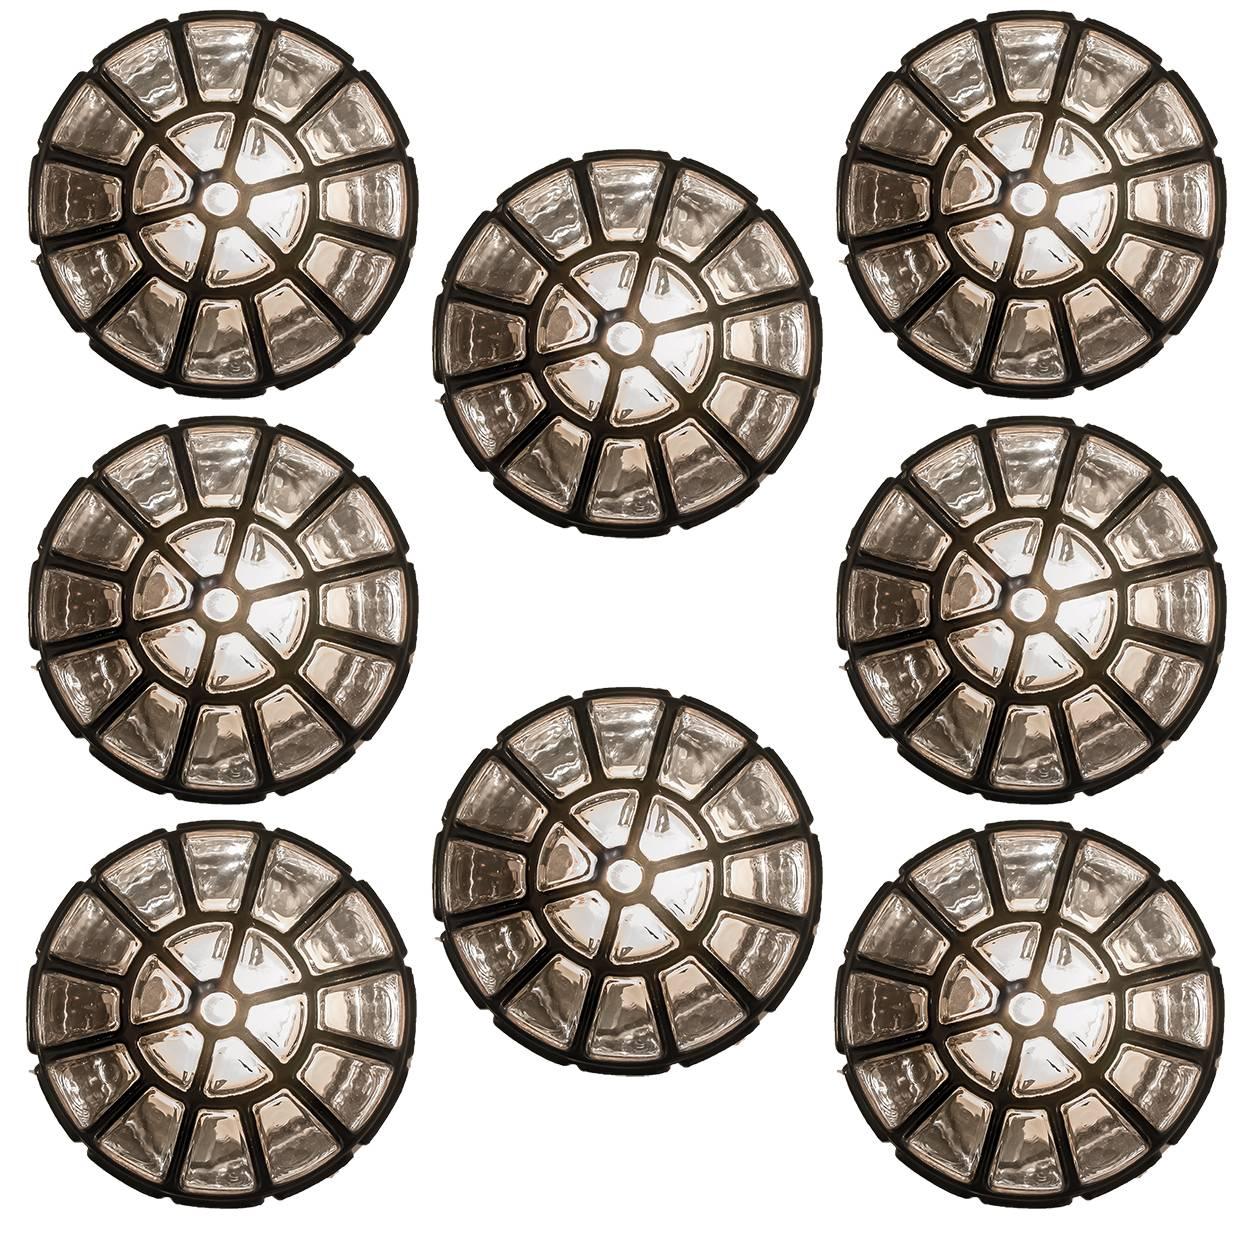 This beautiful and unique set of five octagonal glass light flush mounts or wall lights/ sconces were manufactured by Glashütte Limburg in Germany during the 1960s (late 1960s or early 1970s). Nice craftsmanship. Each lamp, made from elaborate clear